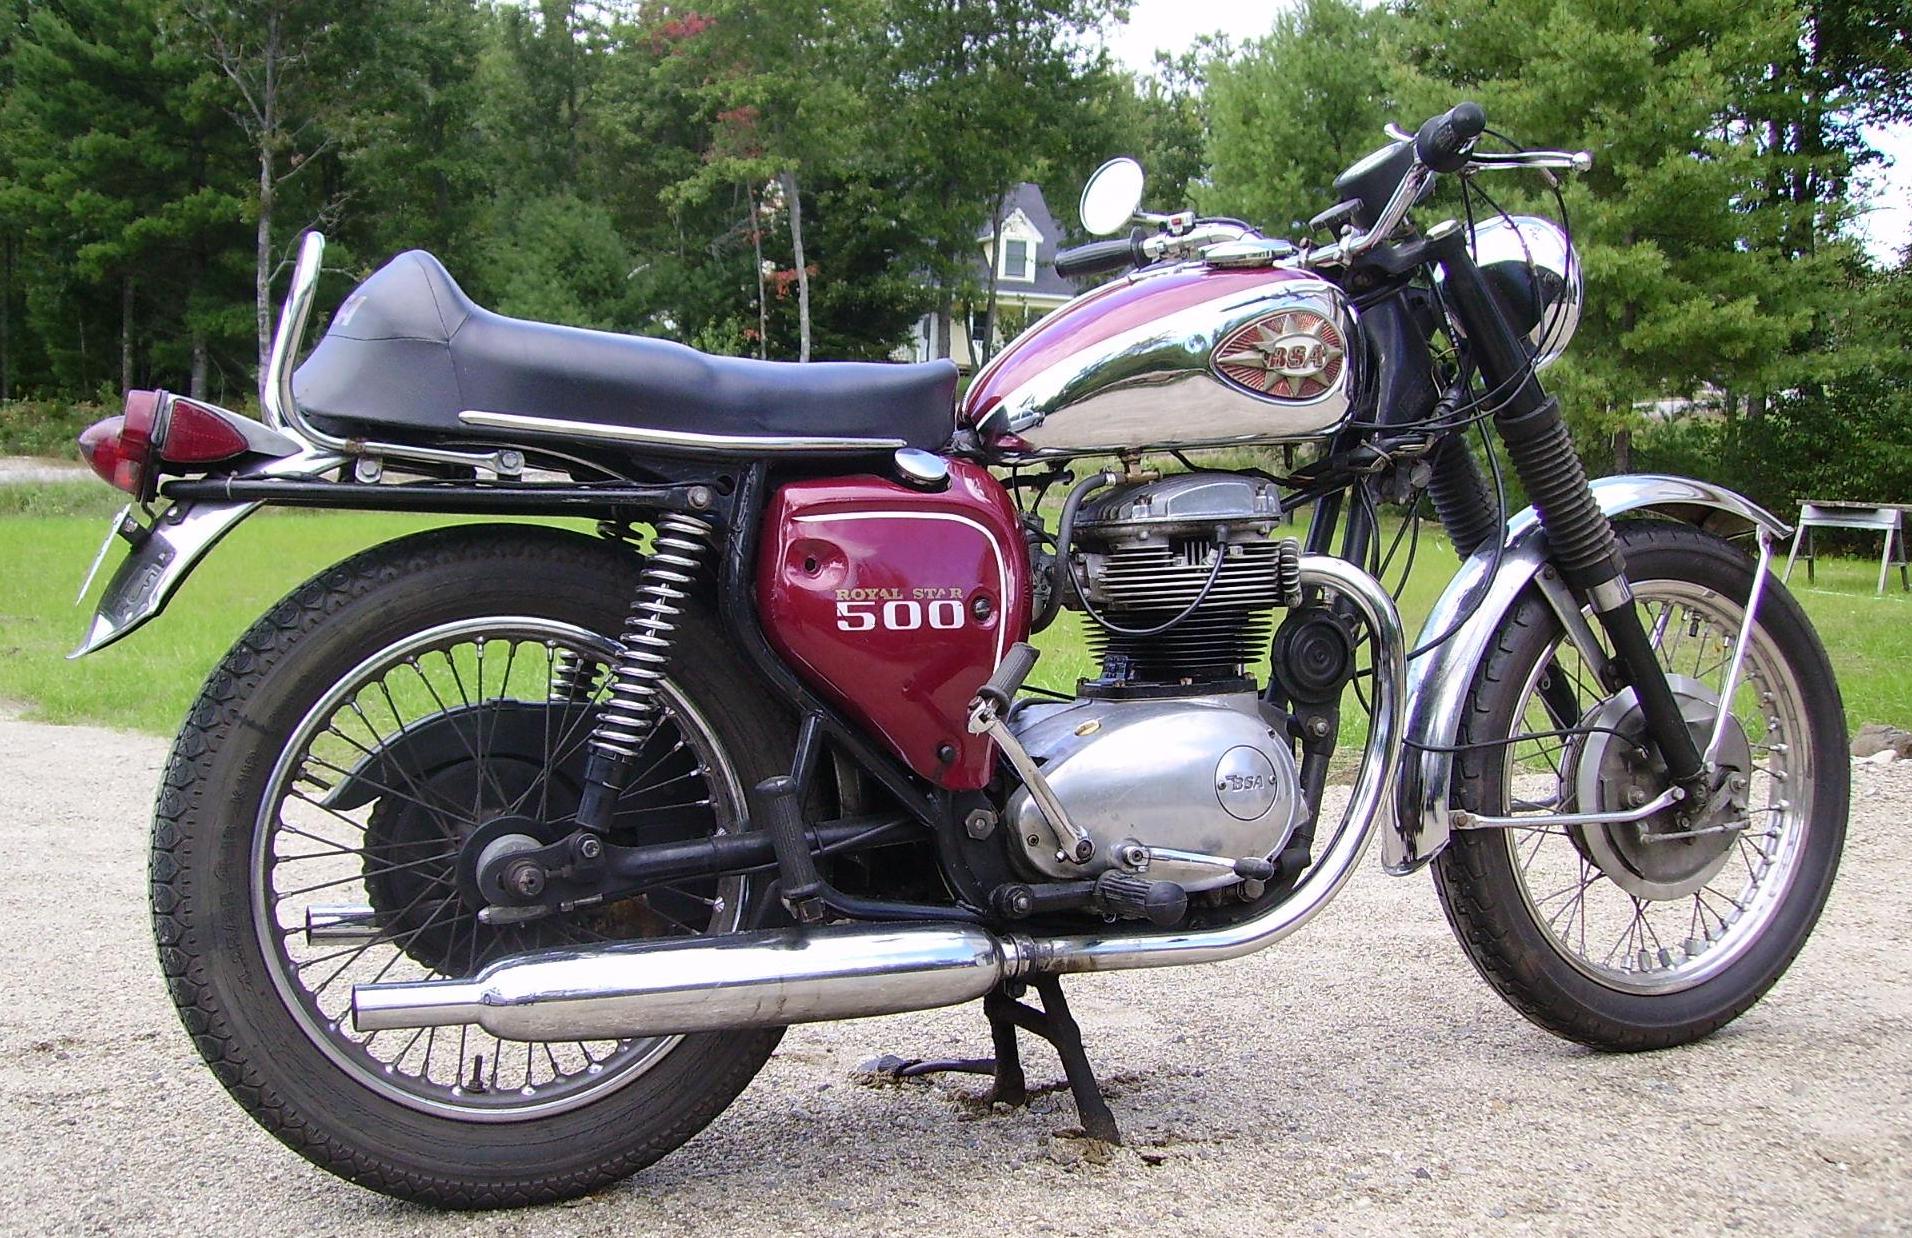 Top 10 motorcycle marques that should be revived